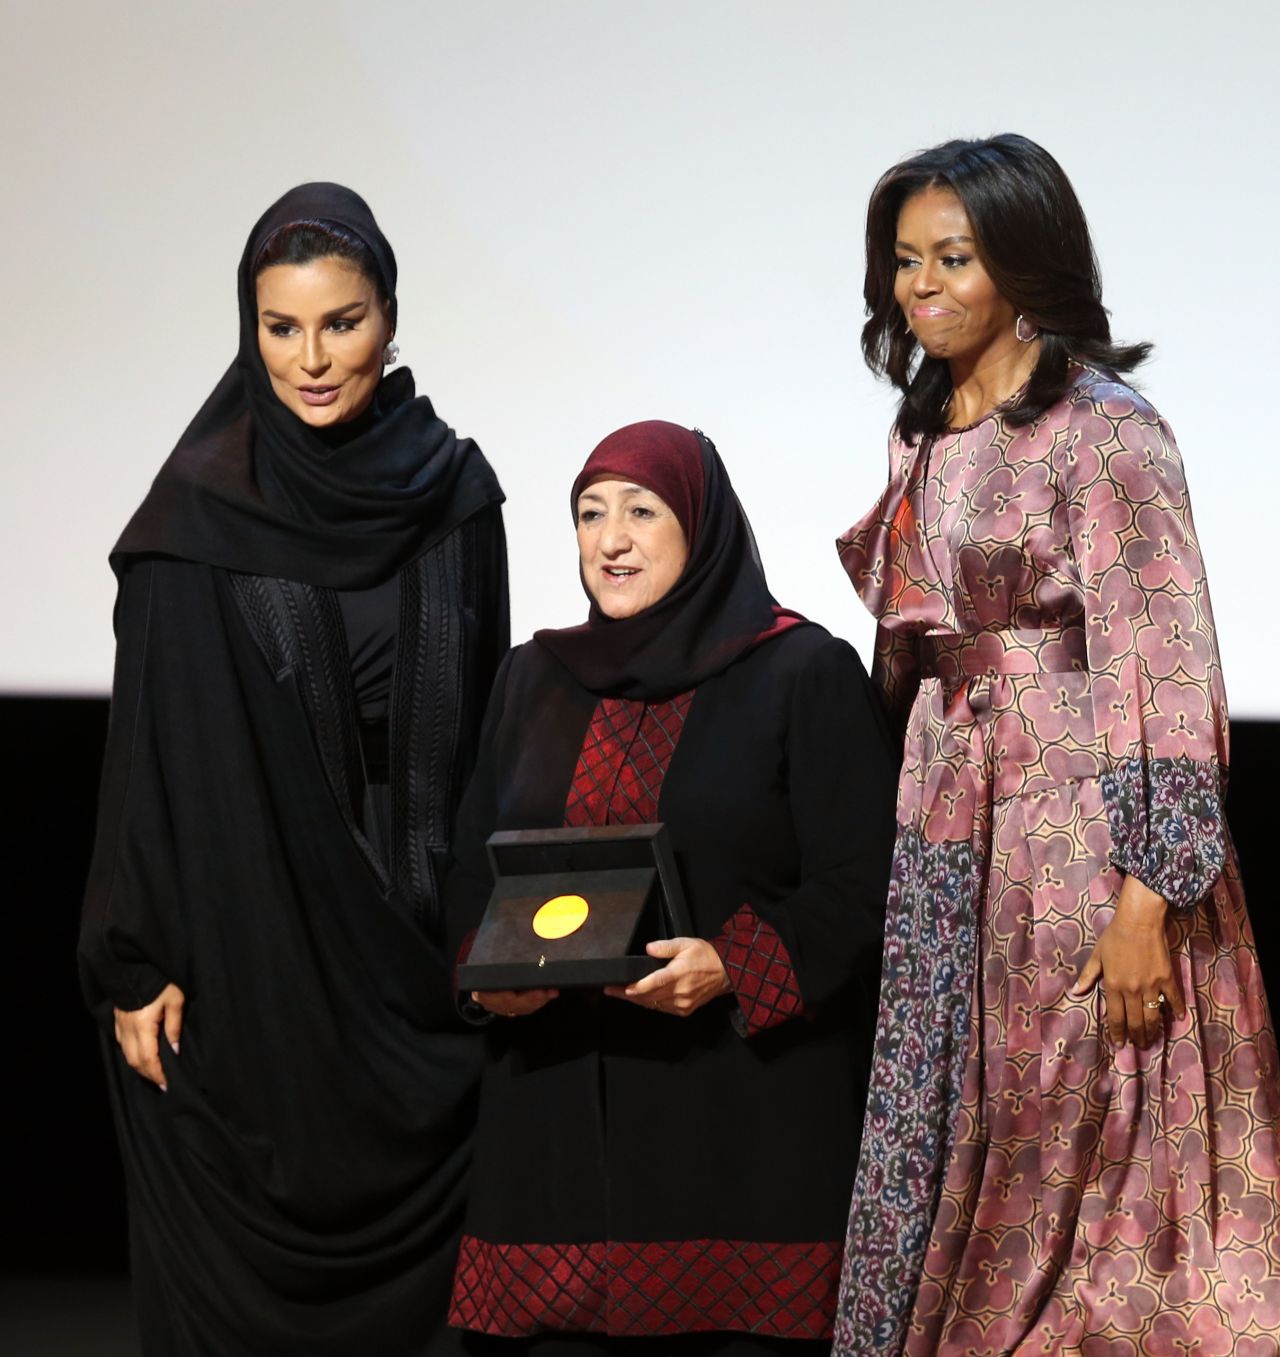 Afghan Dr. Sakena Yacoobi, center, receives a prize from Obama and Sheikha Moza bint Nasser, chairwoman of the Qatar Foundation, during the education summit on November 4. Yacoobi is the CEO of the Afghan Institute of Learning, which she founded in 1996.